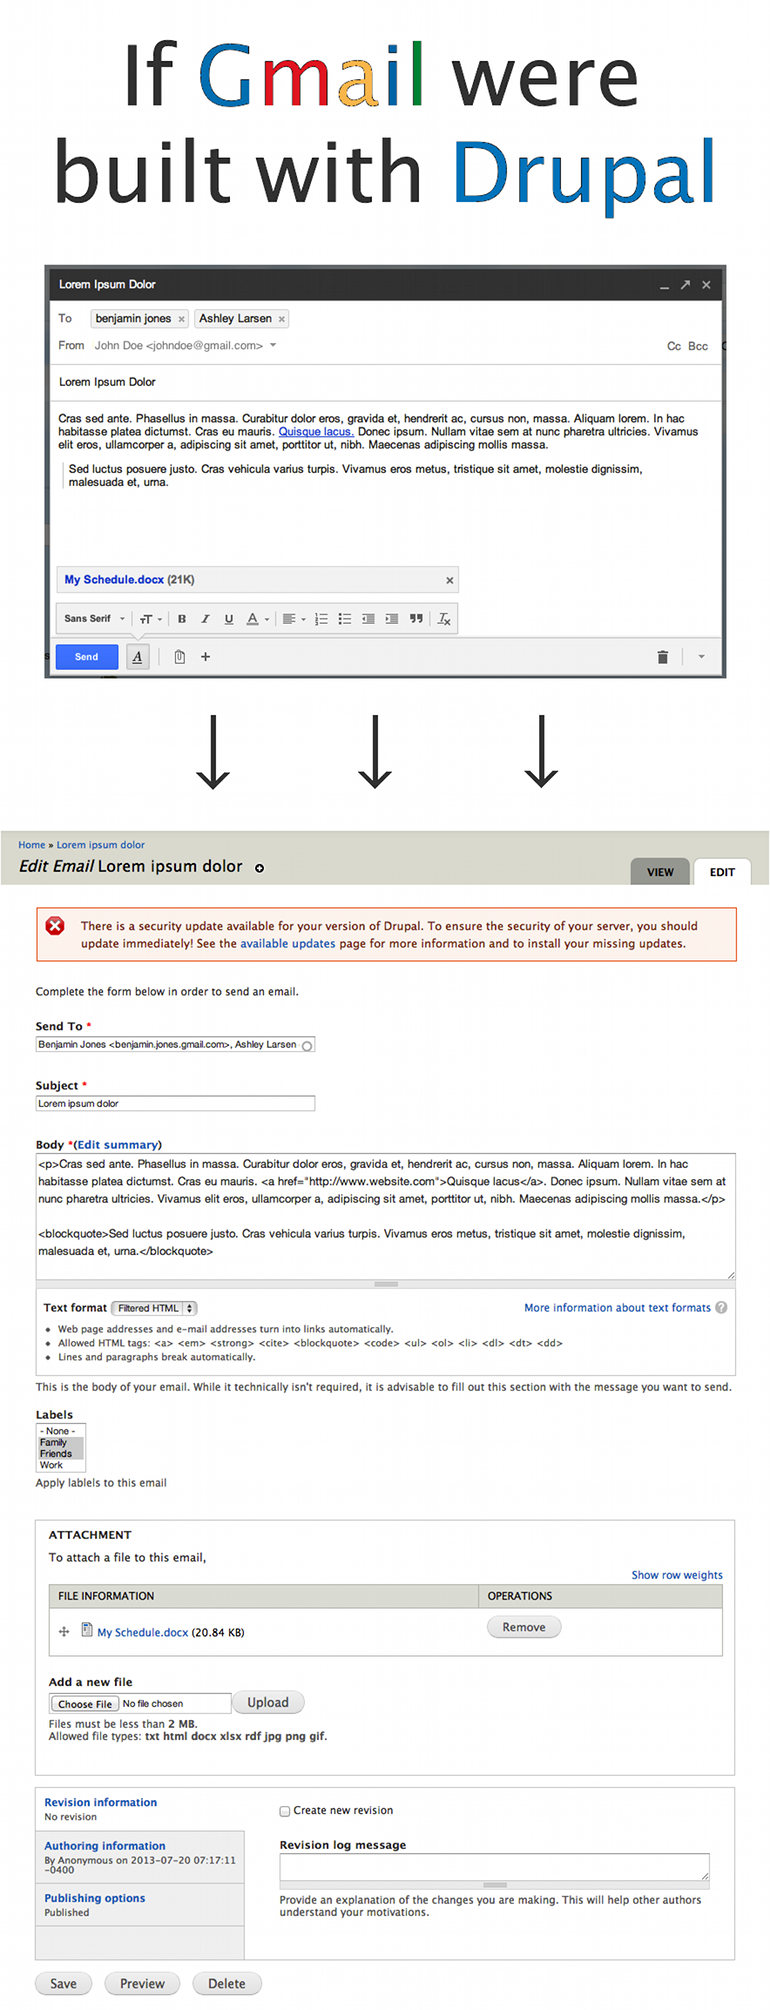 A comparison of the Gmail interface with similar fields in Drupal's interface